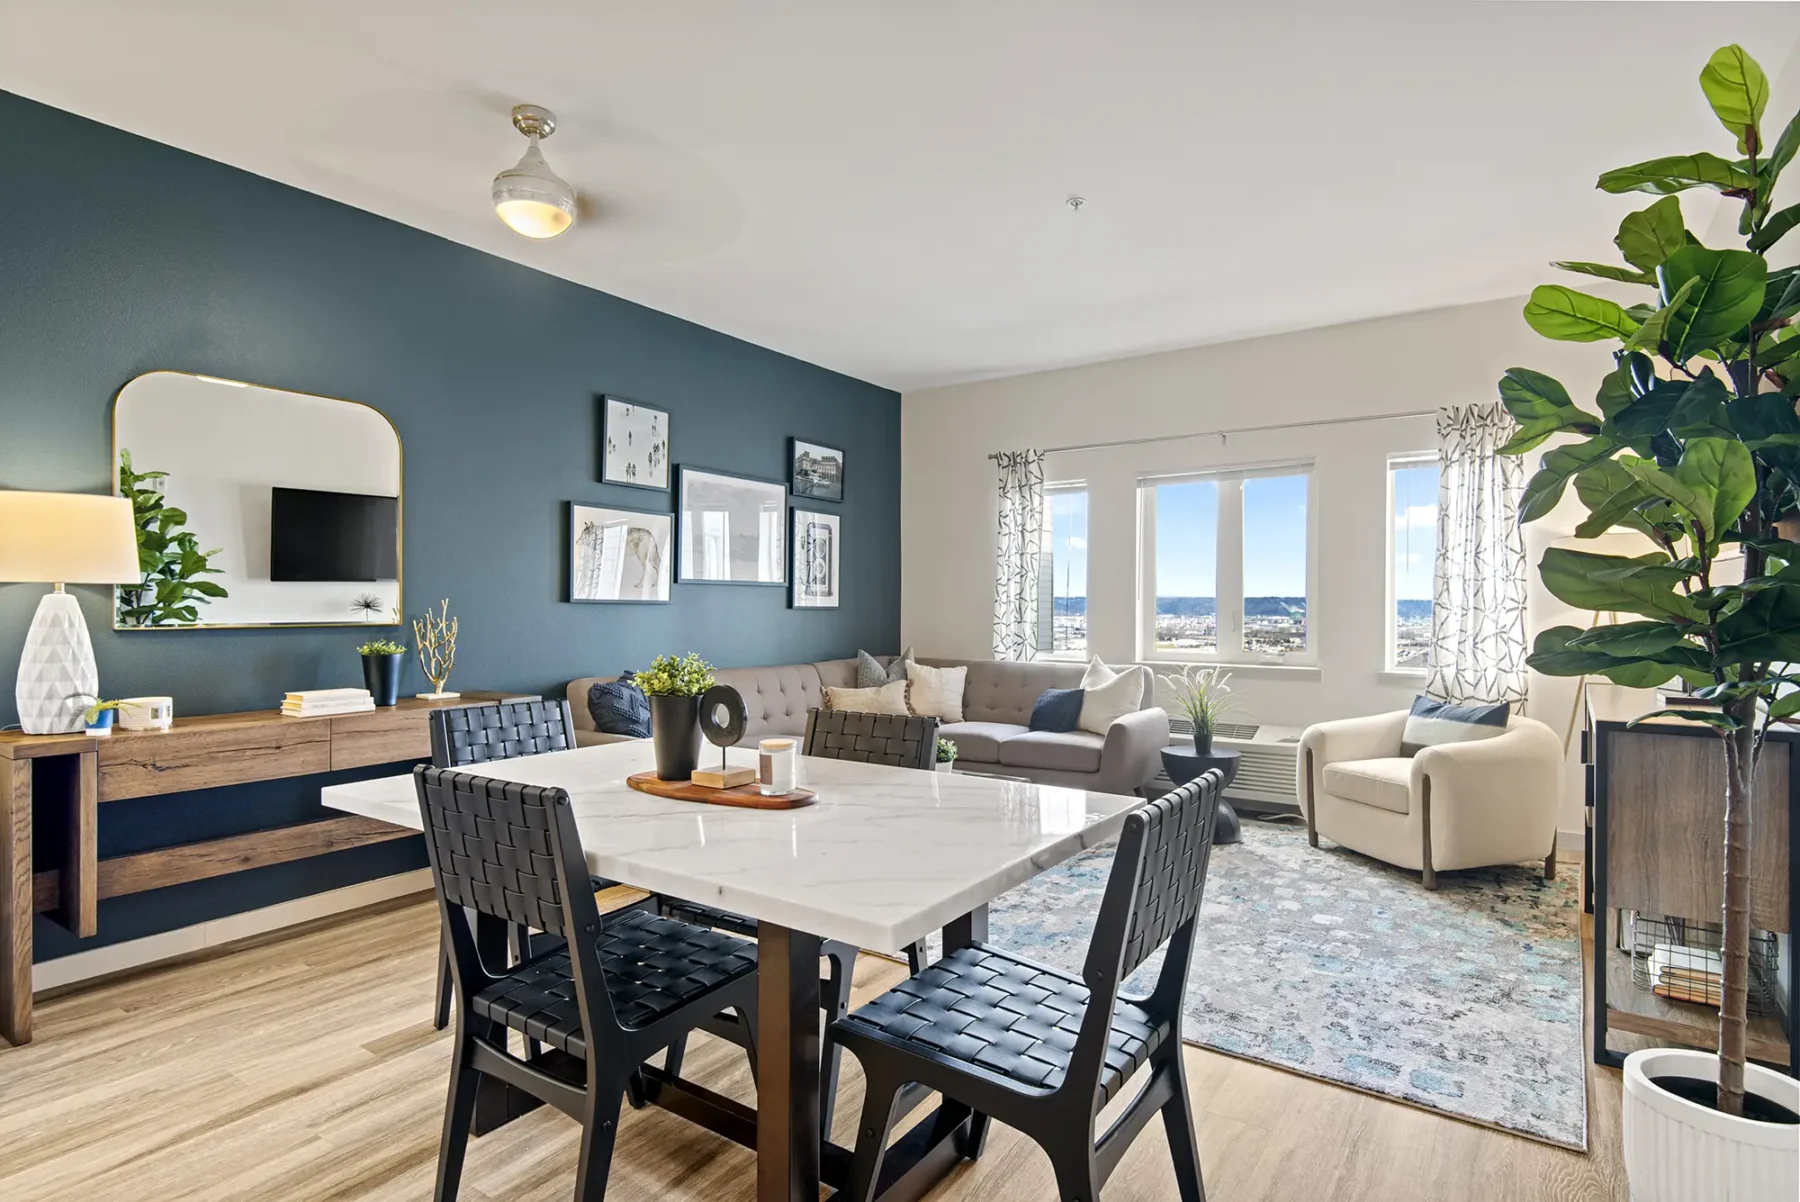 Staged dining and living room with blue accent wall and large windows